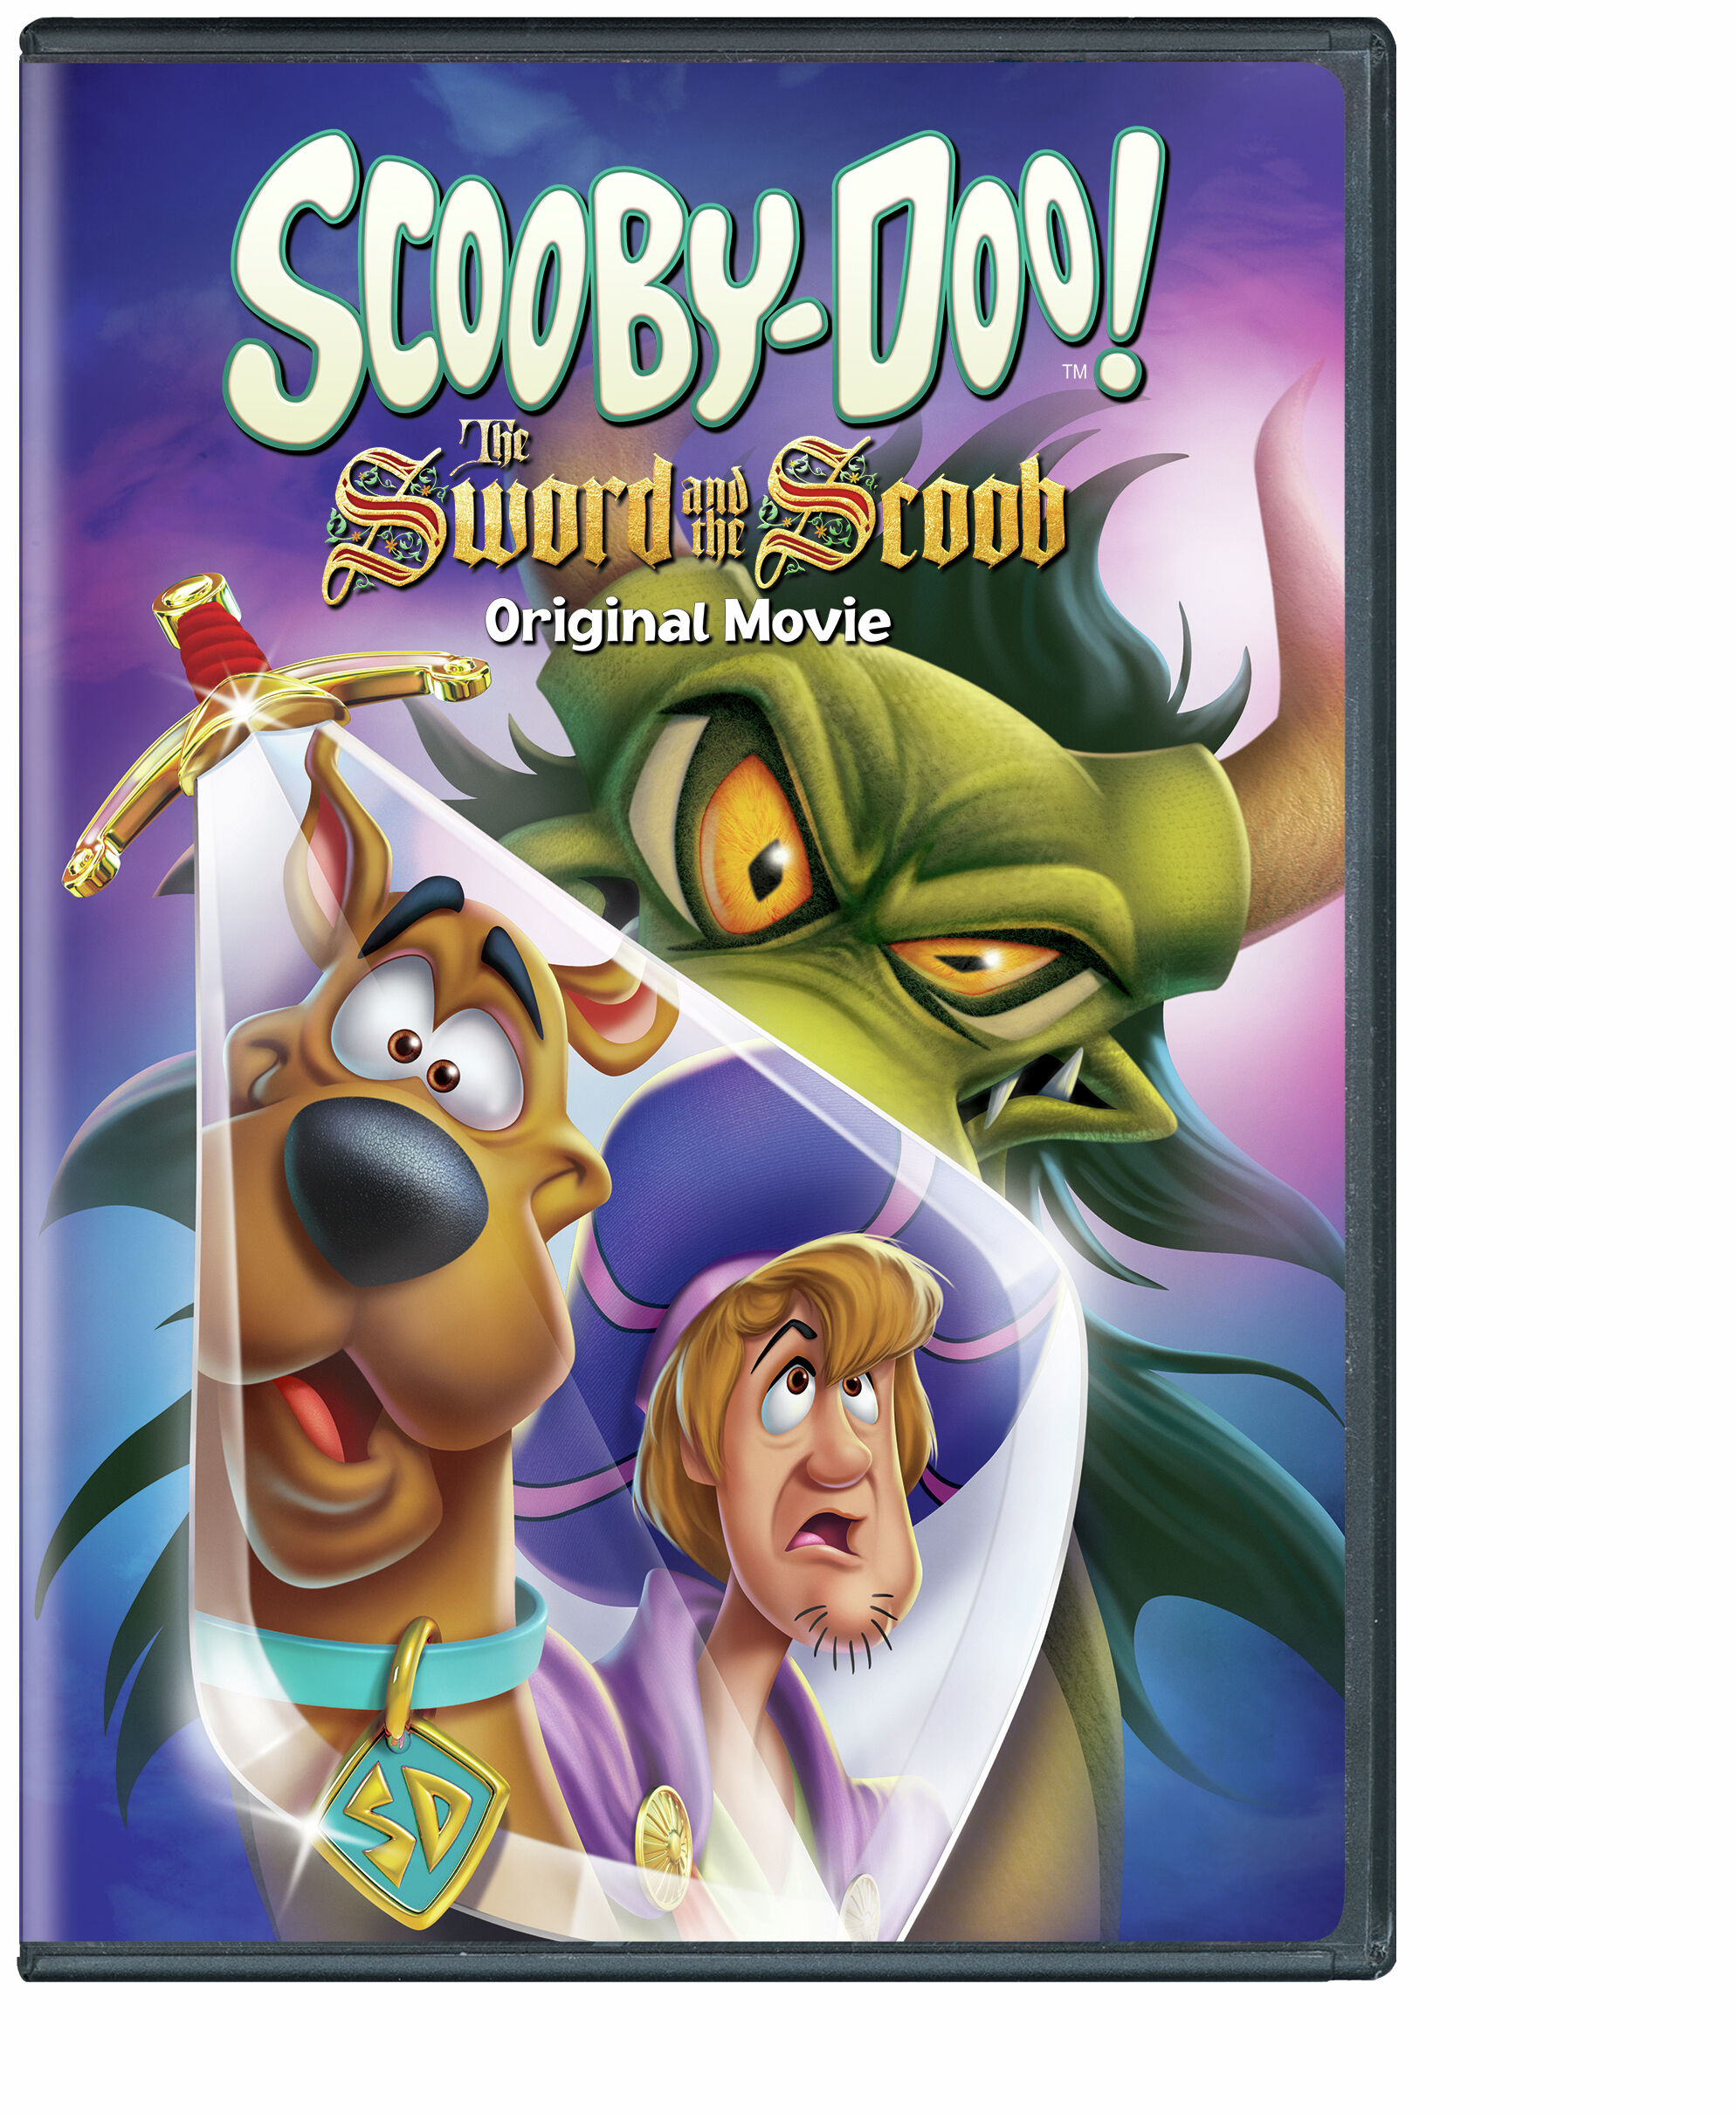 Scooby-Doo The Sword and the Scoob